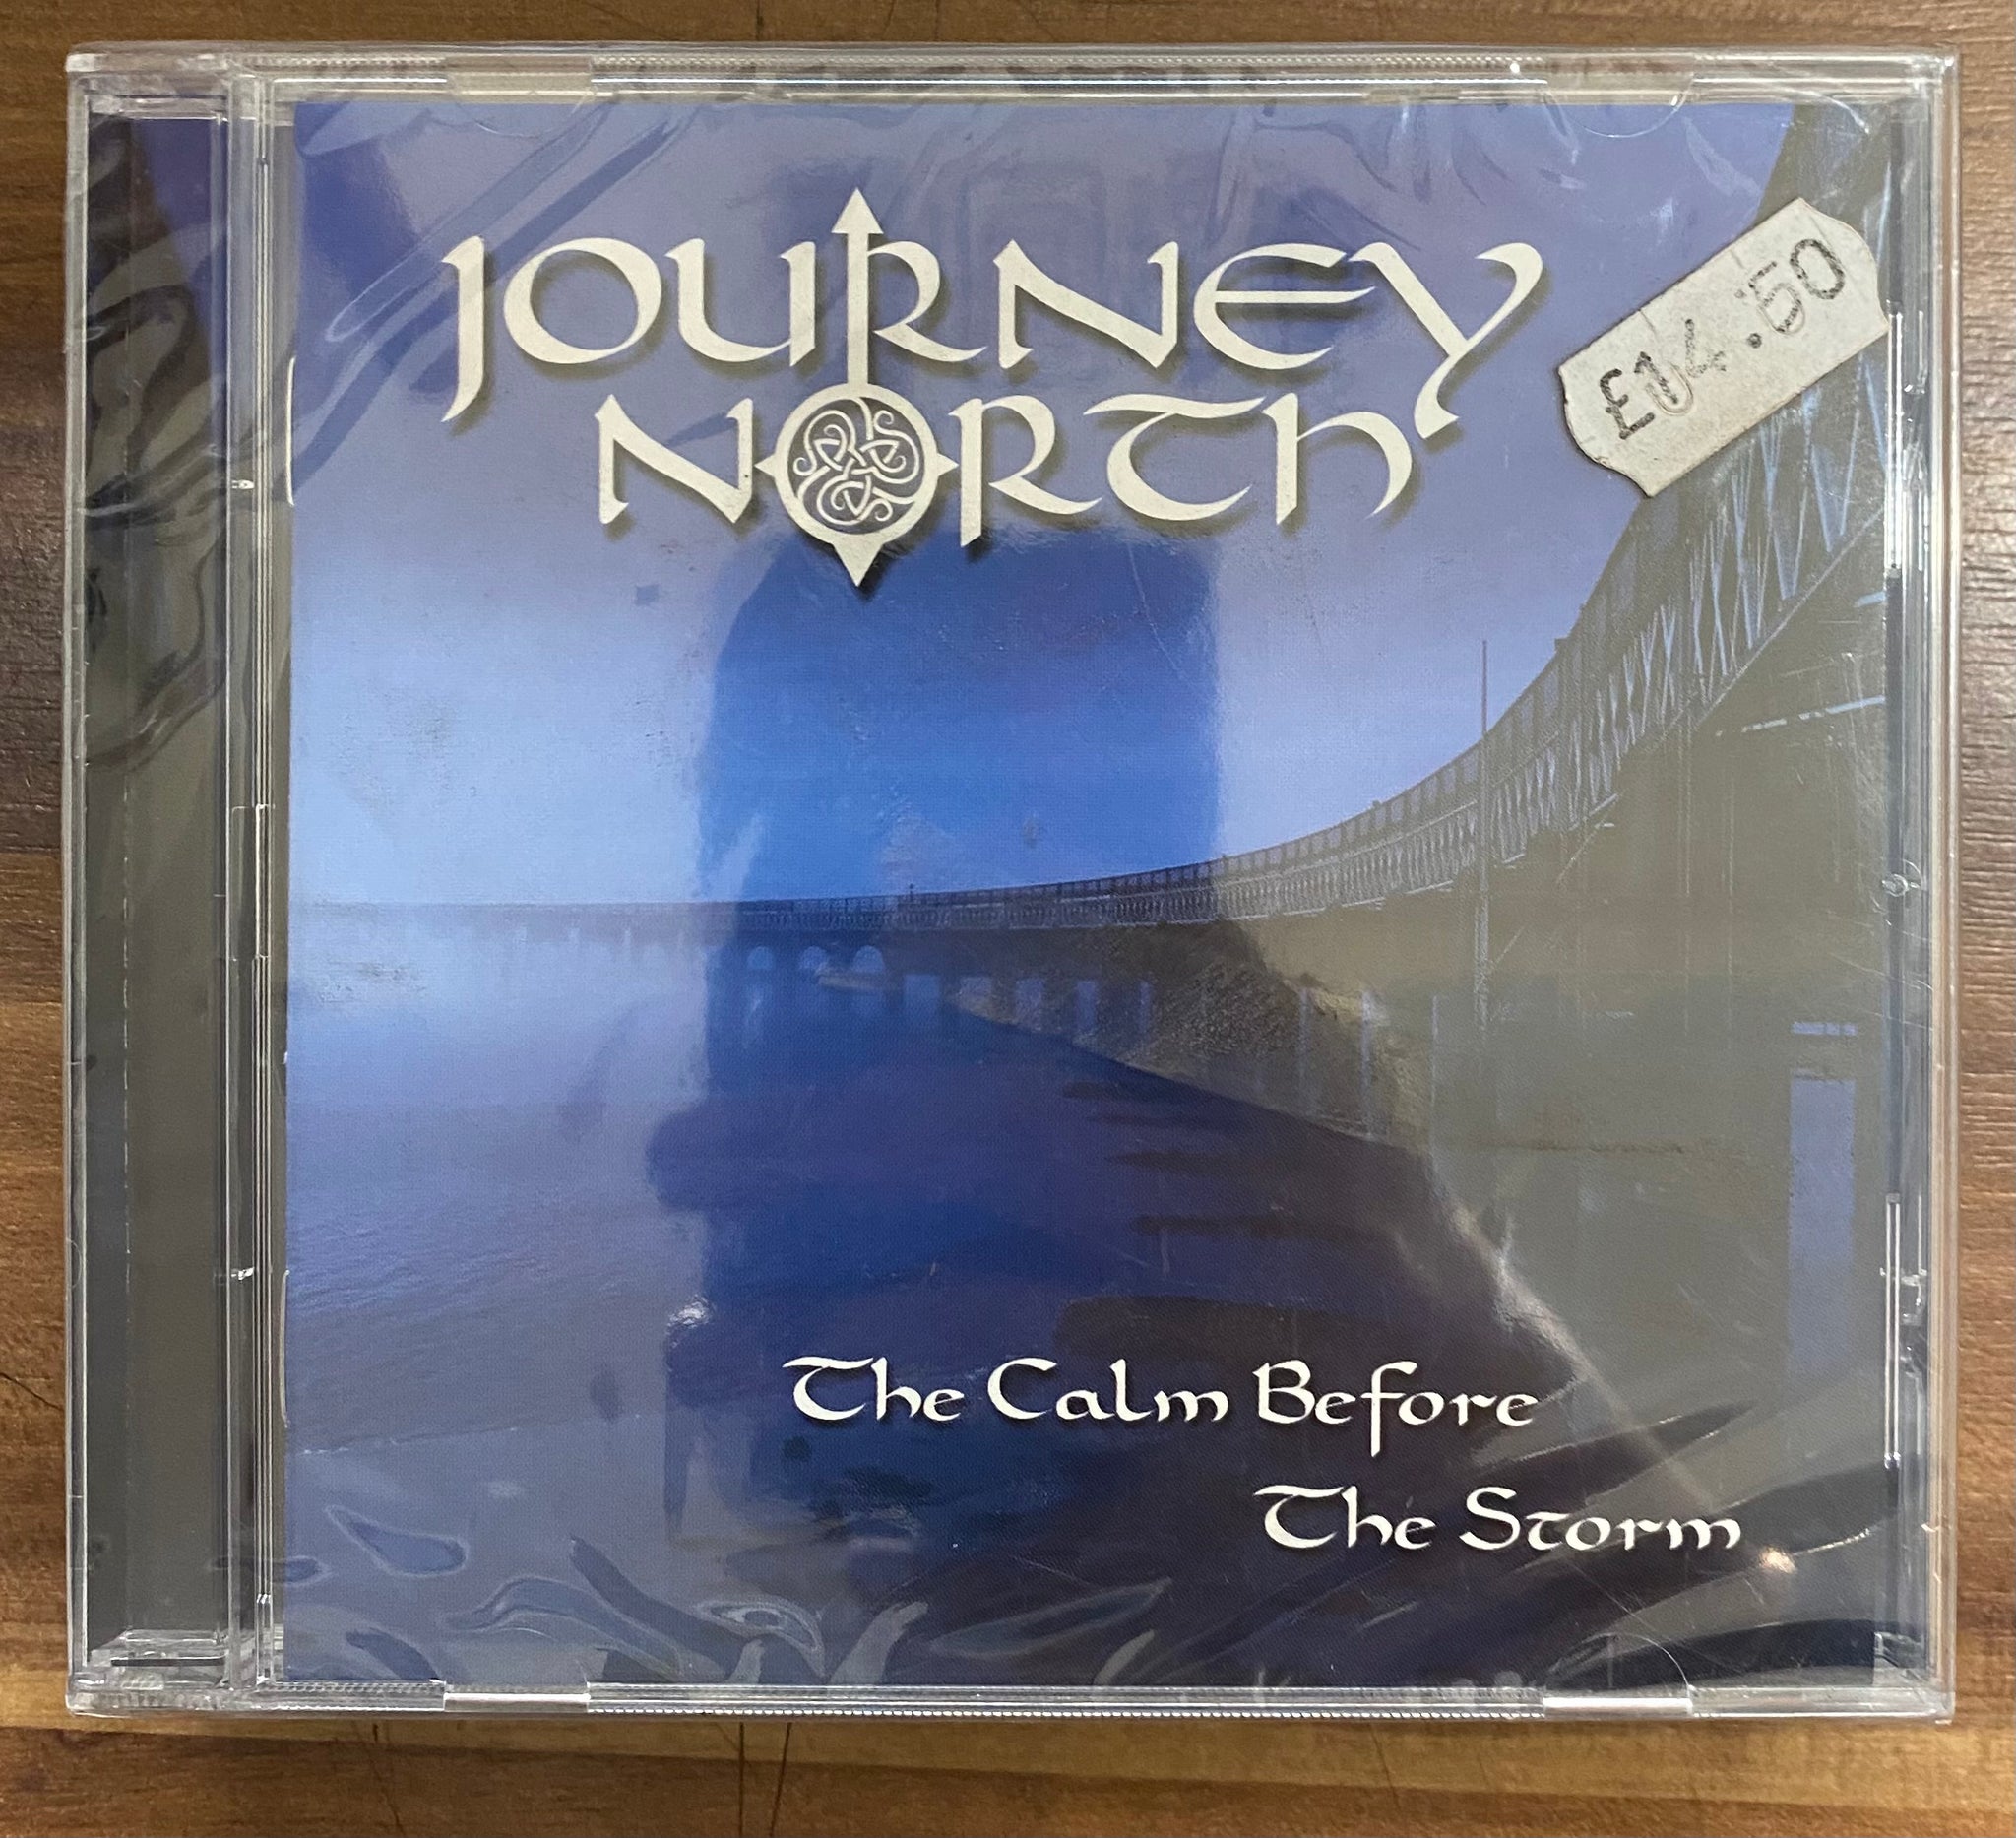 The Calm Before The Storm - Journey North - Kilberry Bagpipes